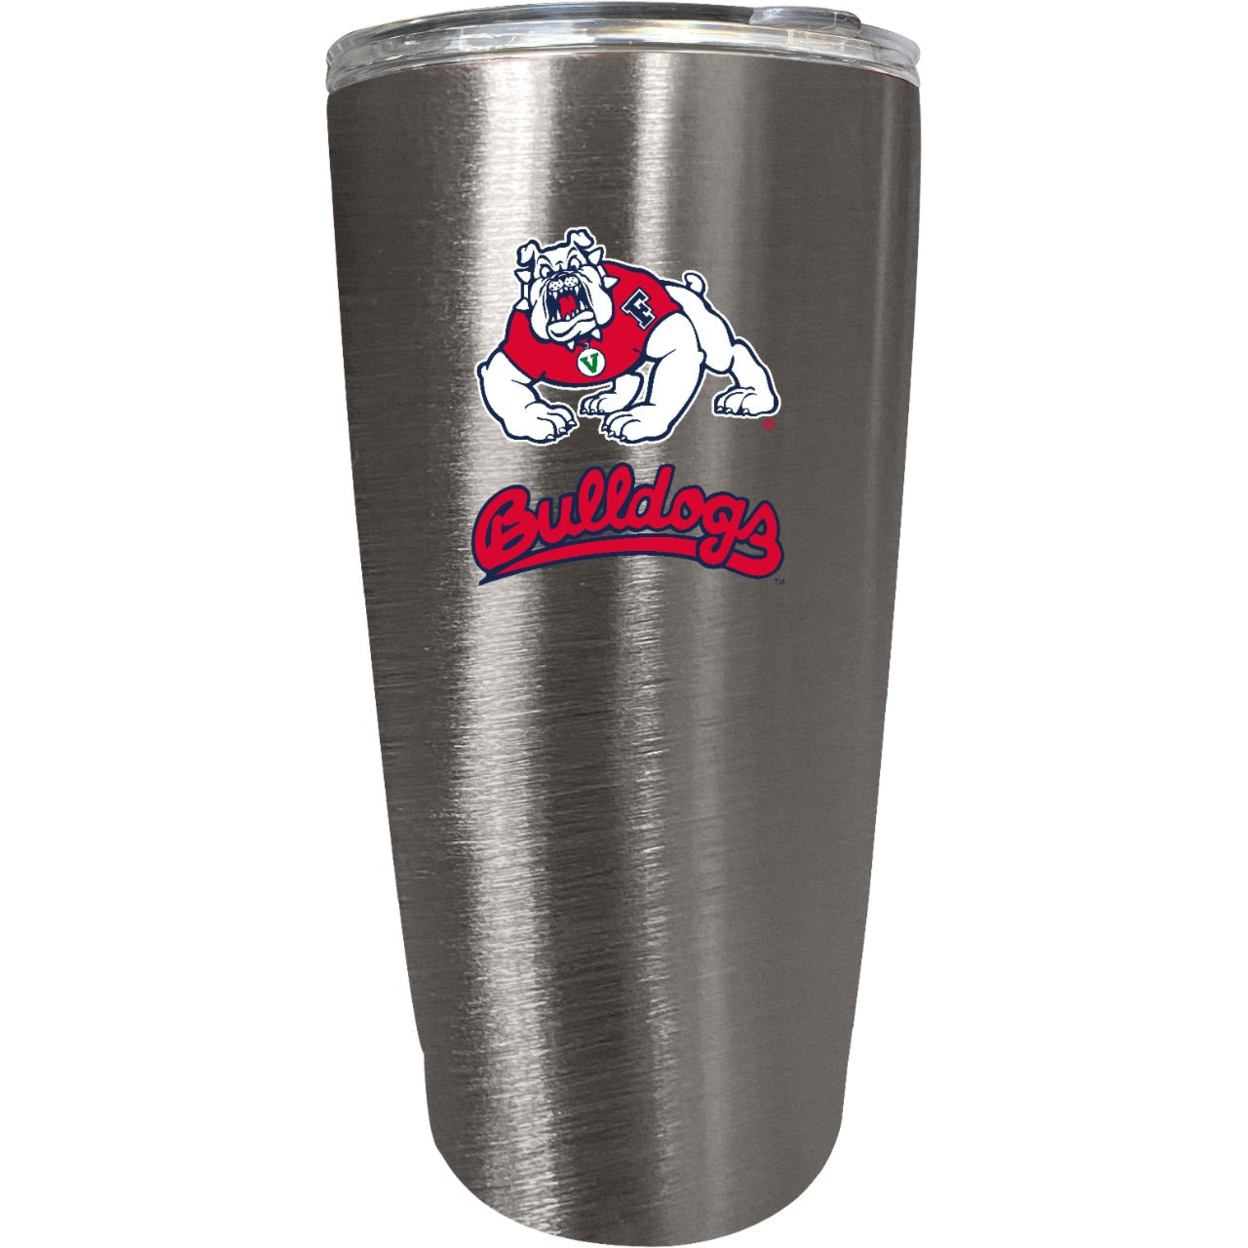 Fresno State Bulldogs 16 Oz Insulated Stainless Steel Tumbler Colorless